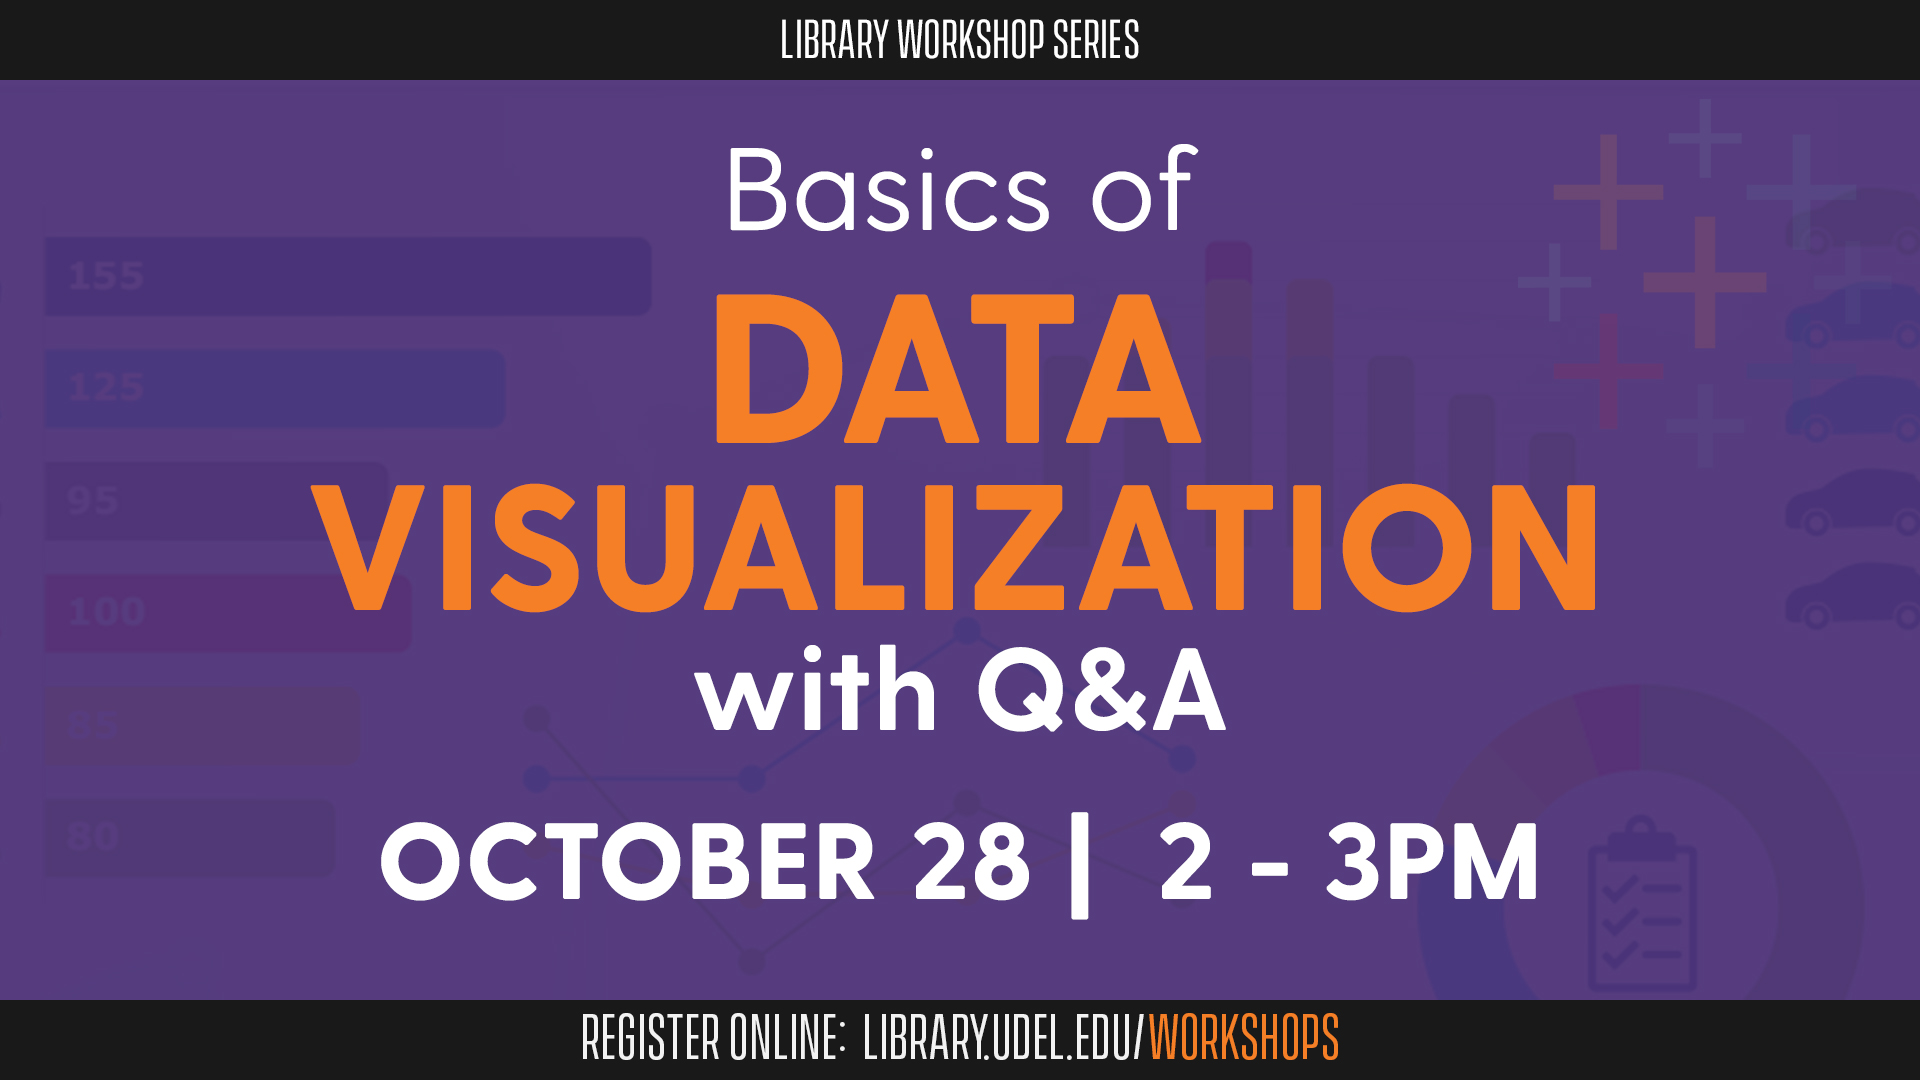 Basics of Data Visualization with Q&A